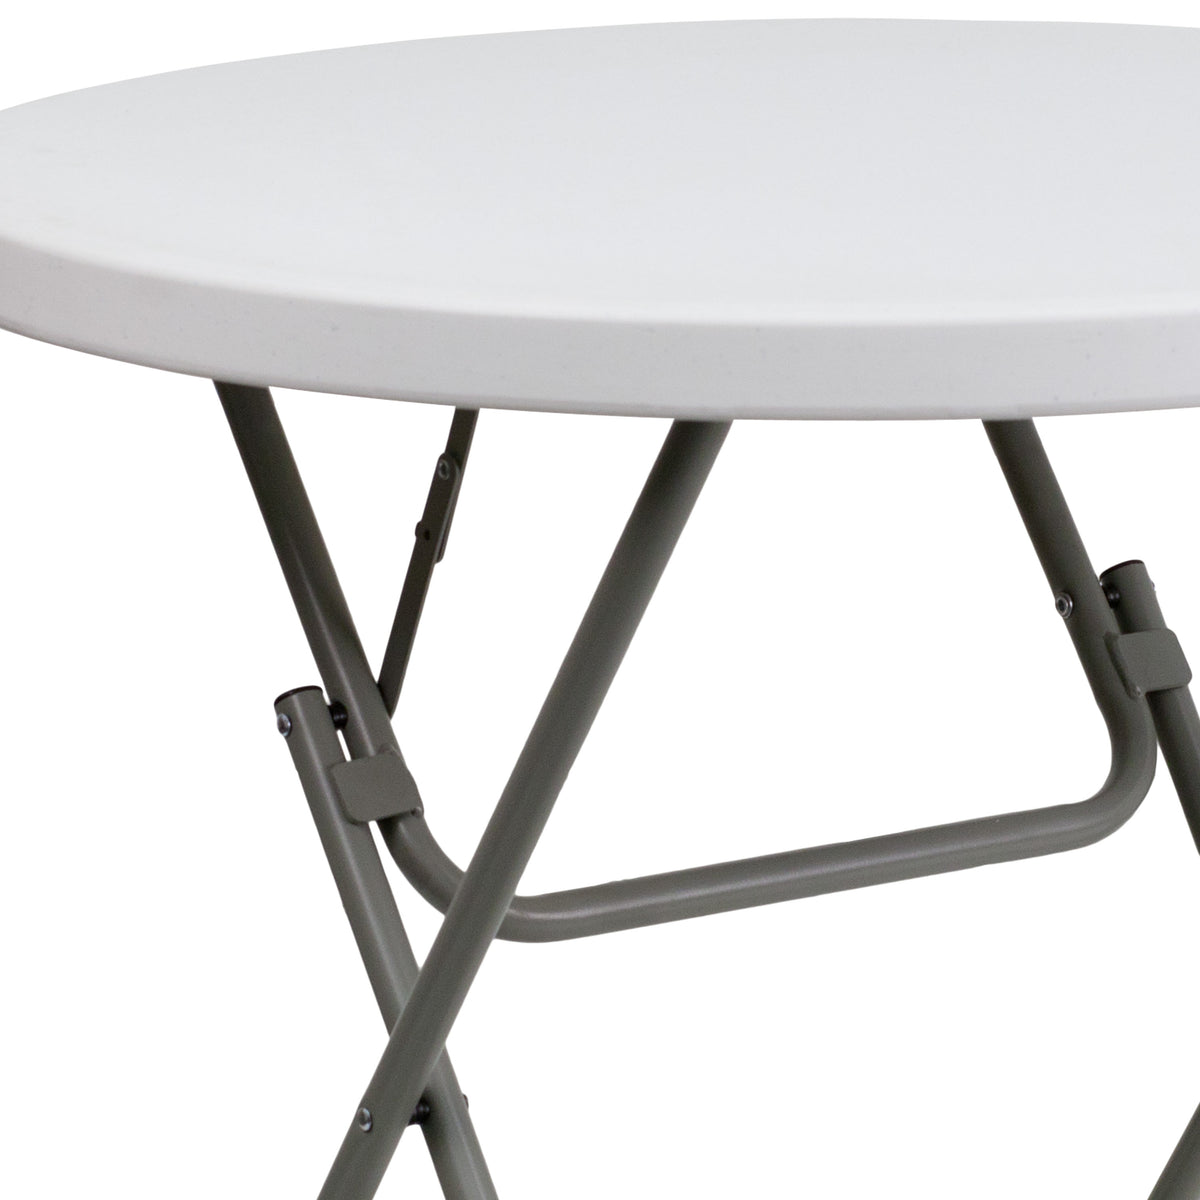 2.63-Foot Round Granite White Plastic Folding Table - Event Table